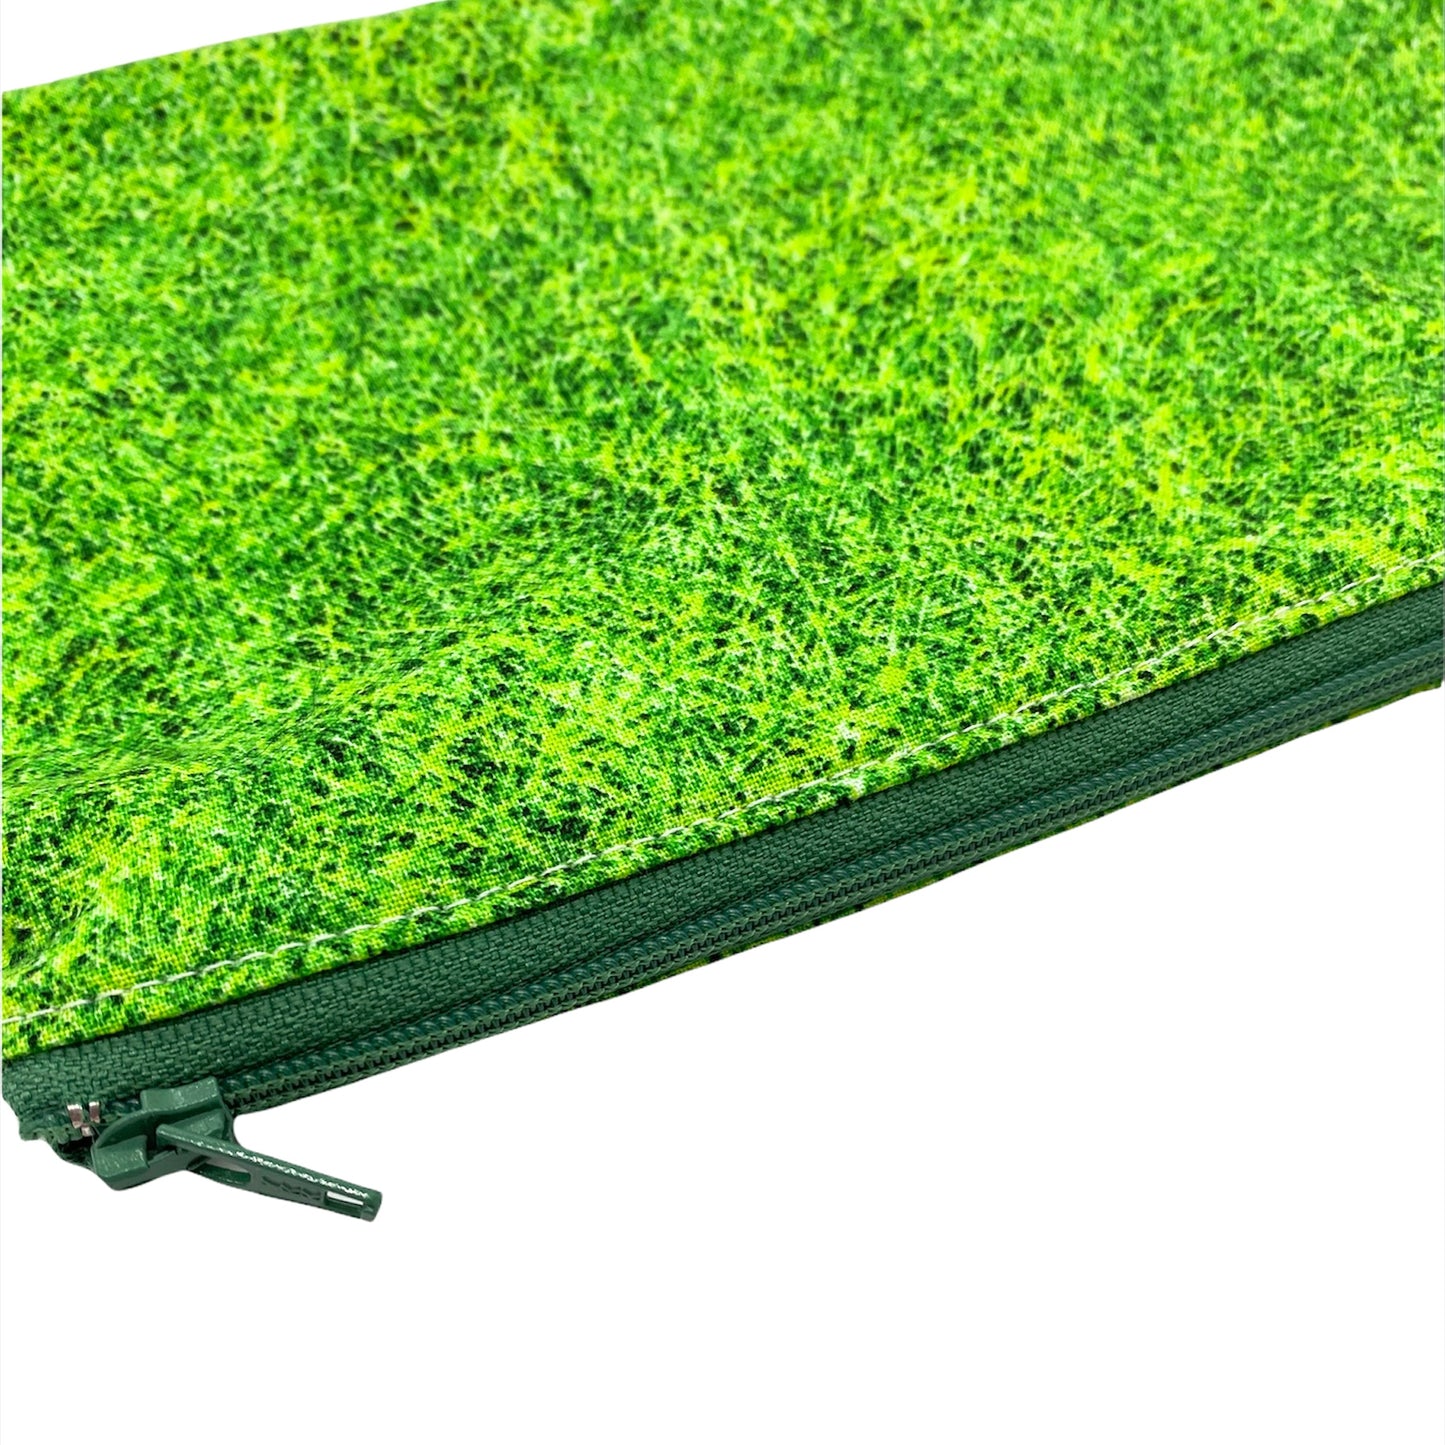 Snack Sized Reusable Zippered Bag Turf Grass